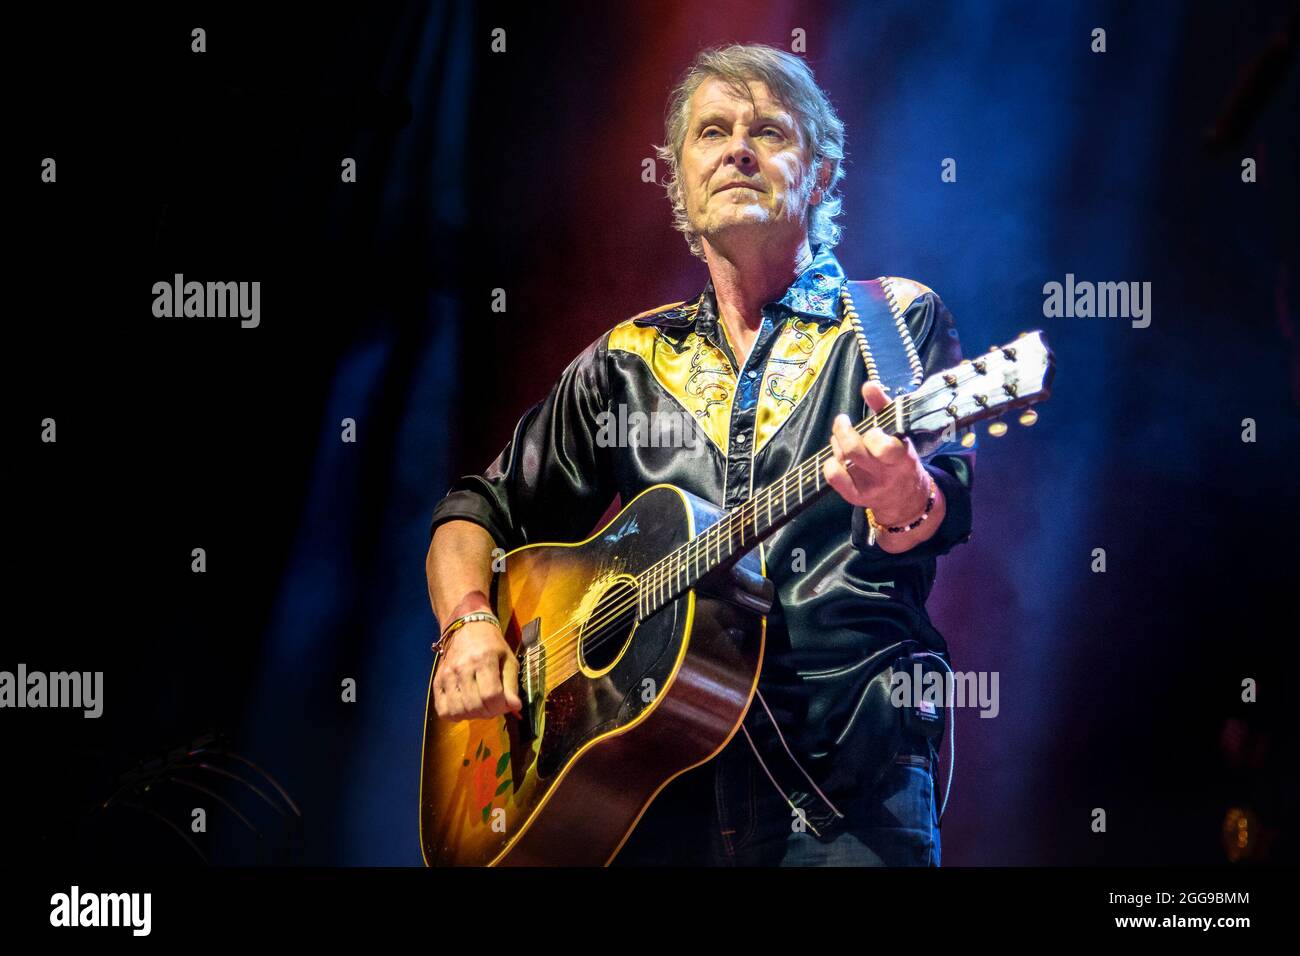 Jim Cuddy lead singer of the Canadian country rock band BLUE RODEO performing at a "Sold Out Show" at the Budweiser Stage in Toronto, Canada. (Photo by Angel Marchini / SOPA Images/Sipa USA) Stock Photo